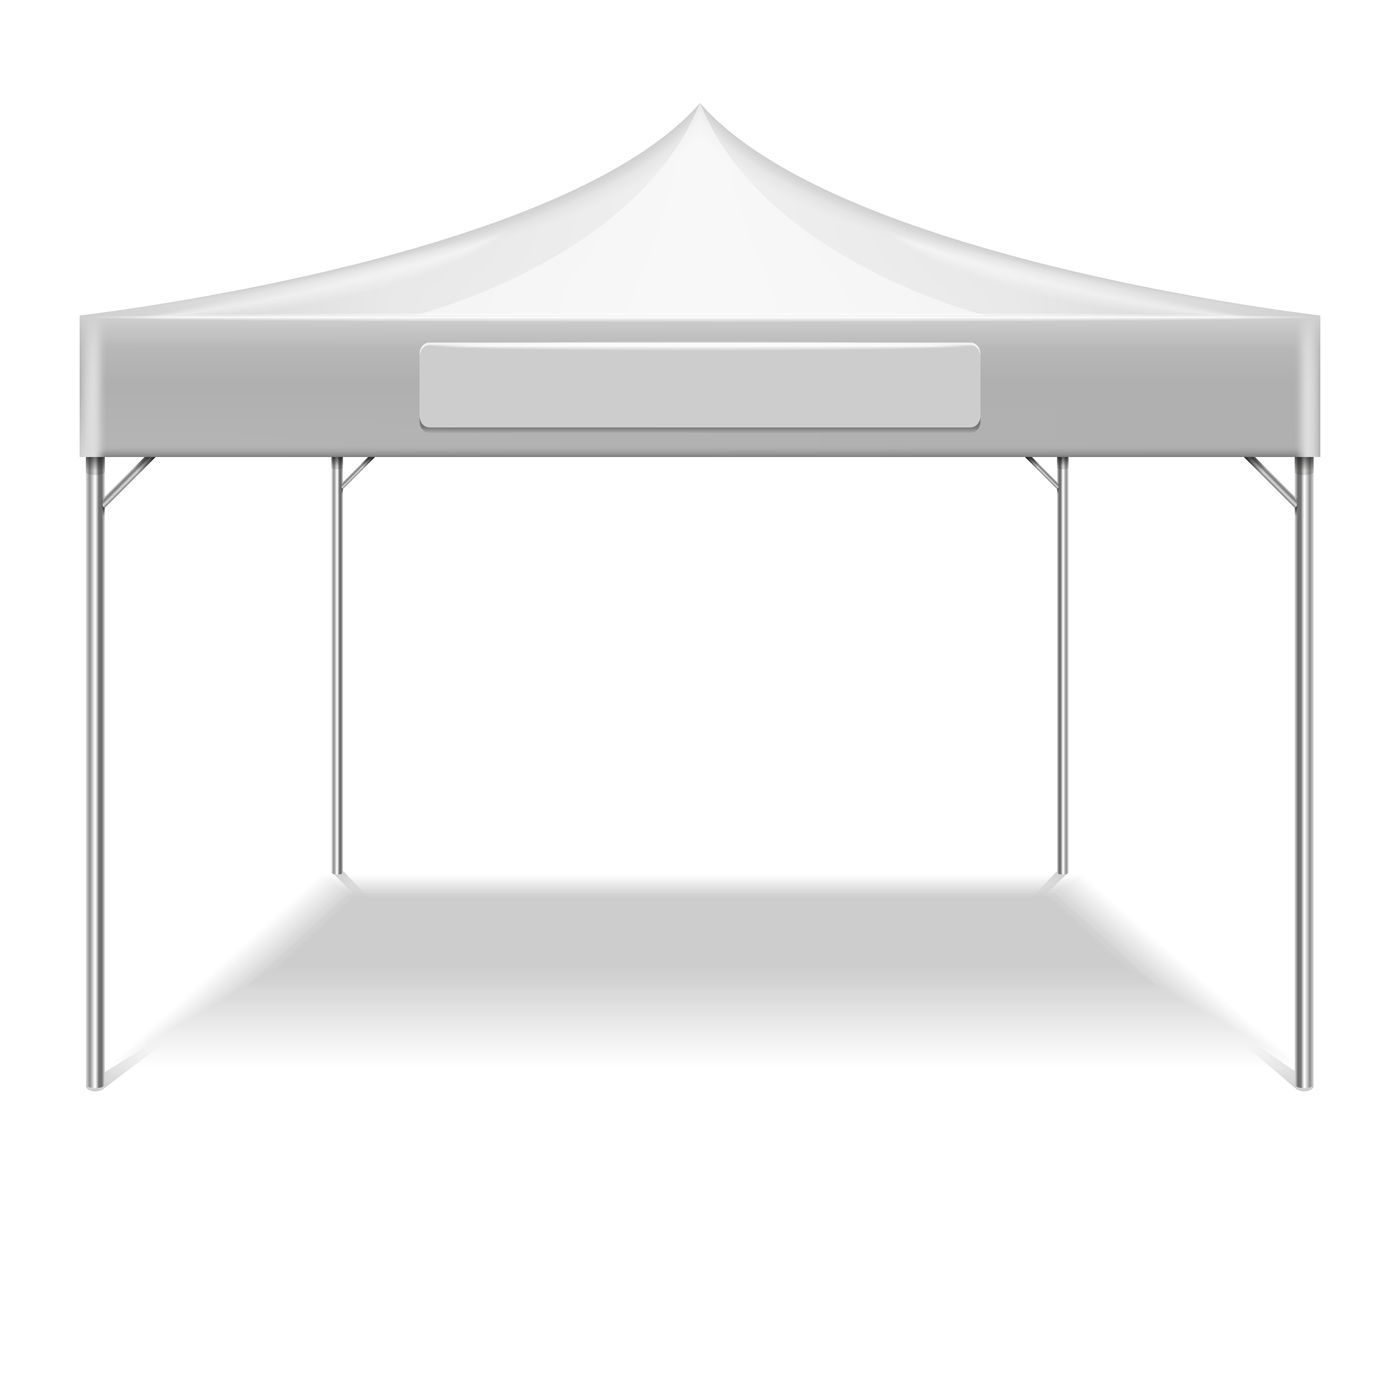 Download Realistic white outdoor folding party tent vector mockup By Microvector | TheHungryJPEG.com